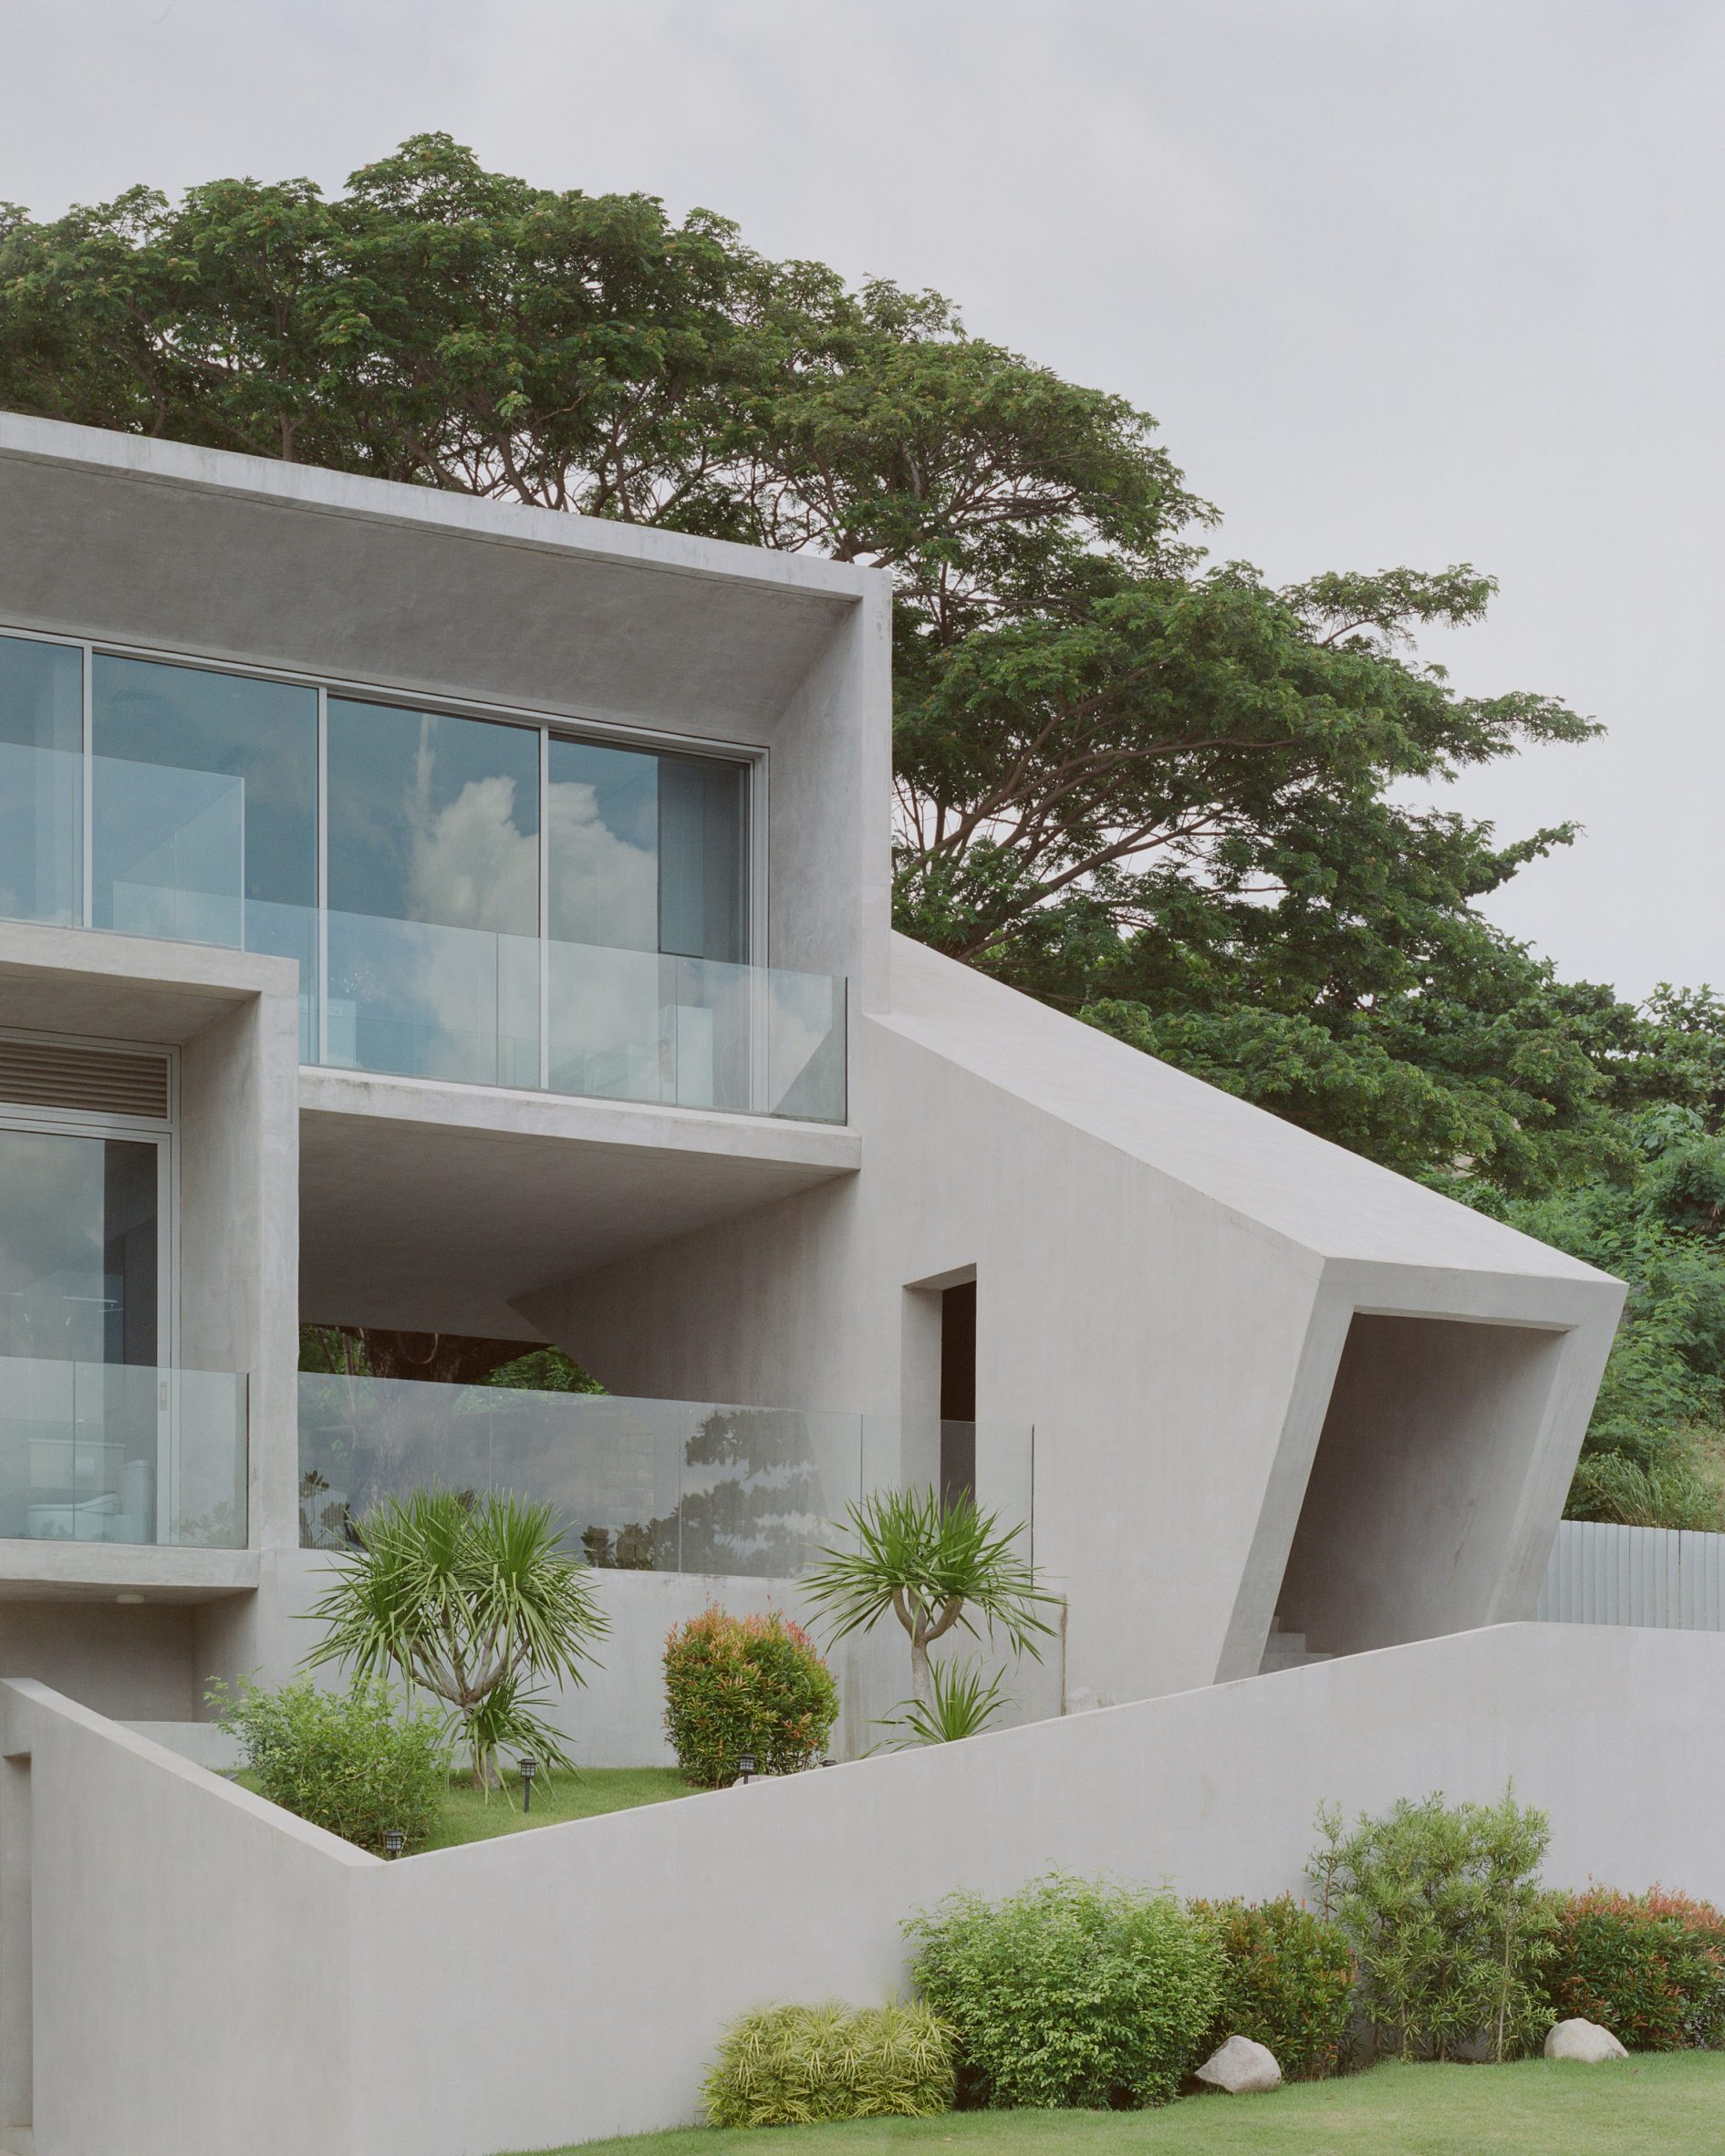 Facade of FR House in the Philippines by CAZA